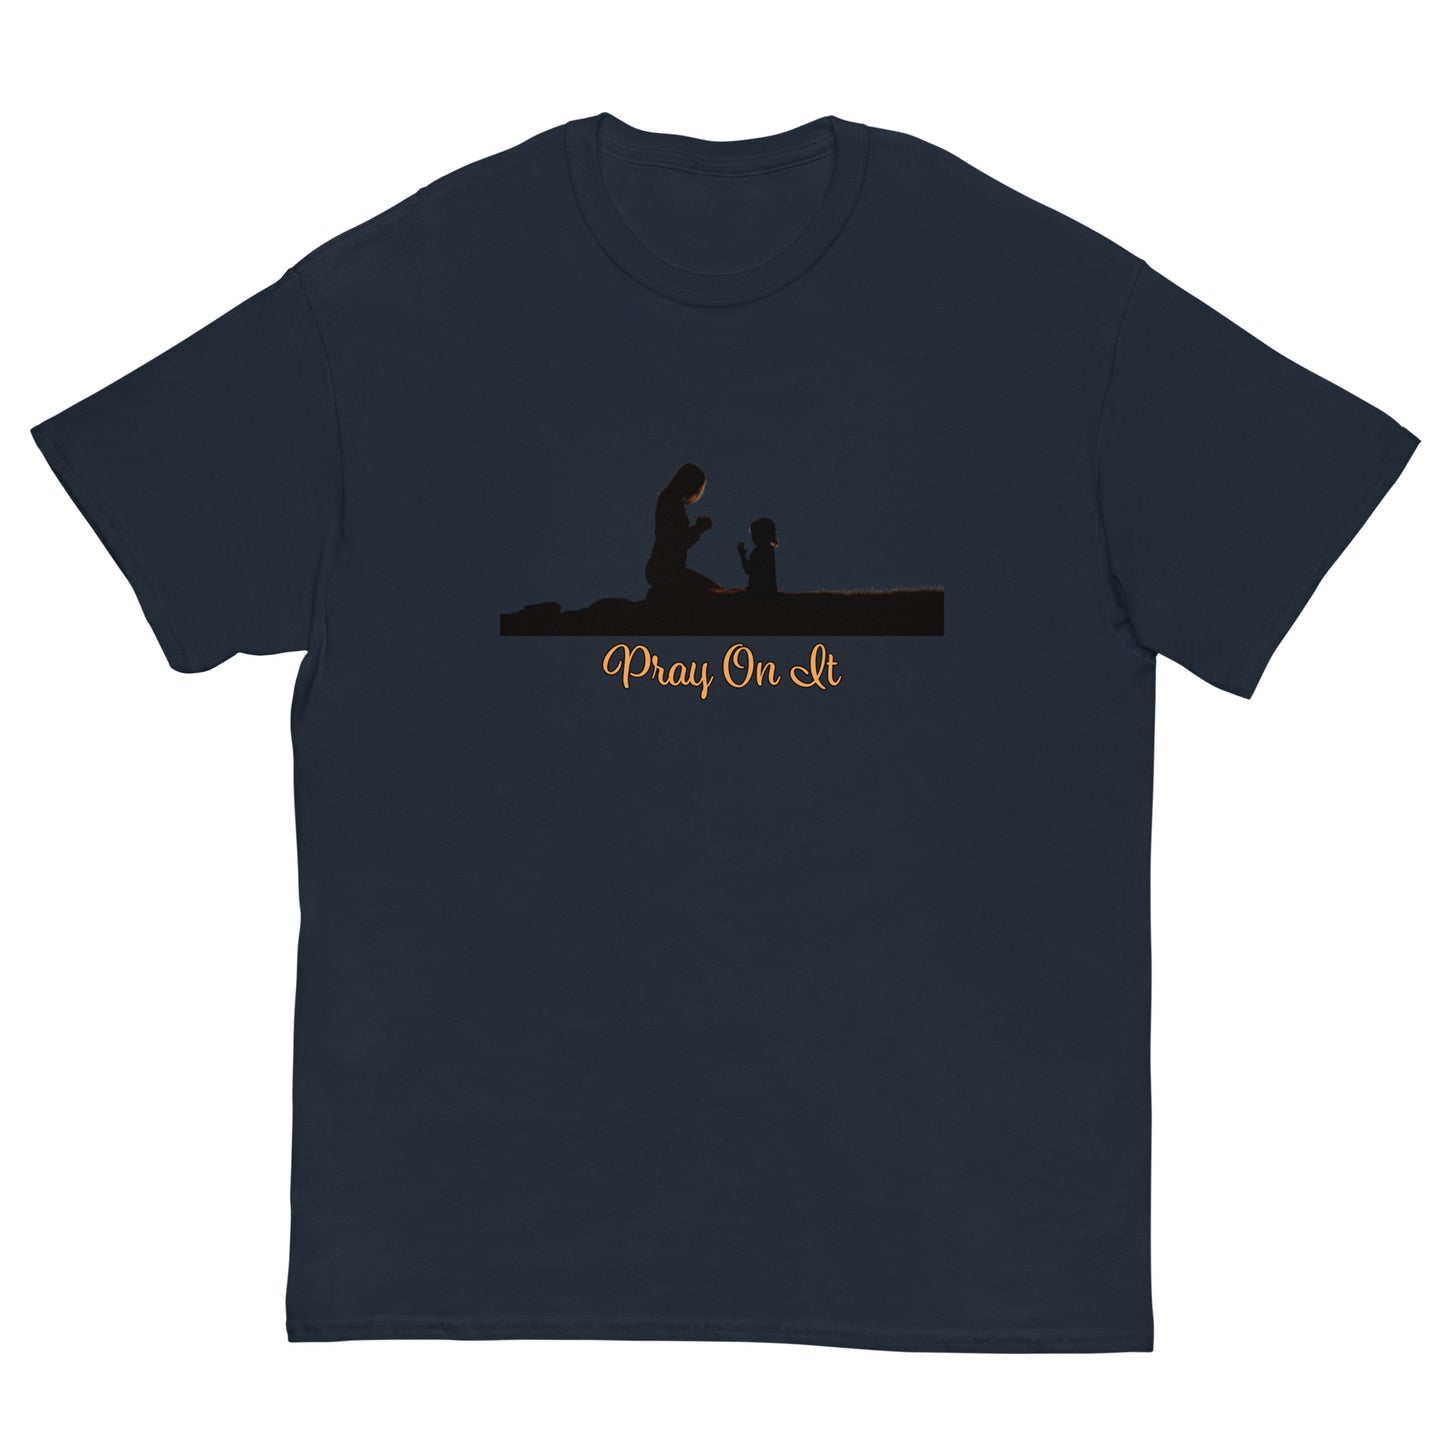 Pray On It (With Silhouette)